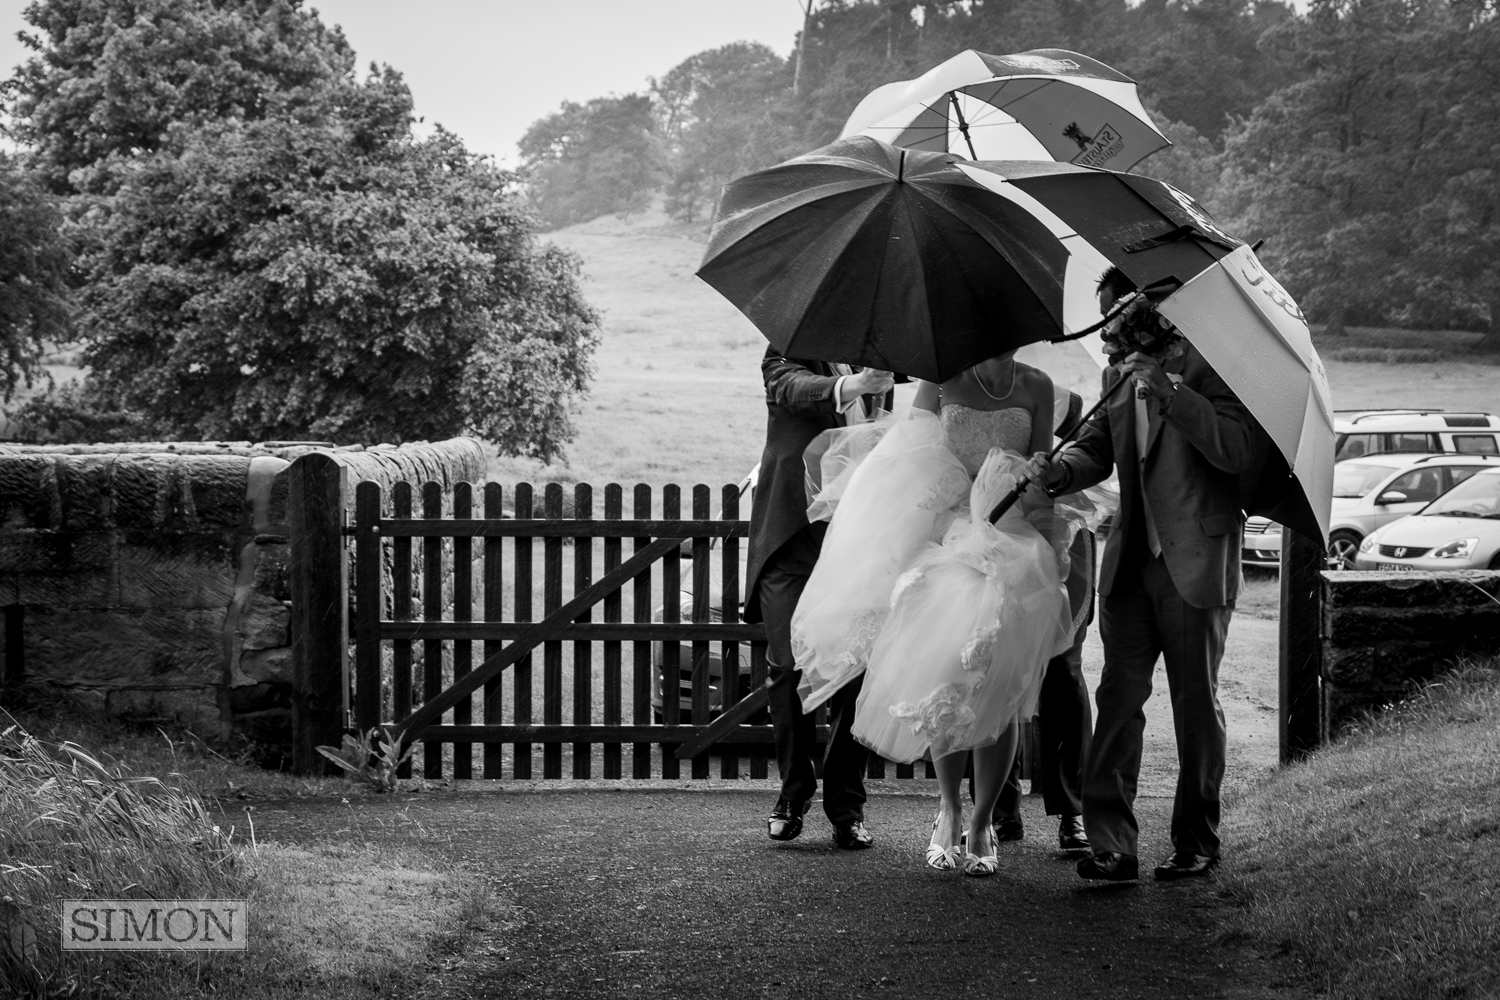 Bride walking int he rain with groomsmen covering her with umbrellas to protect her from the rain